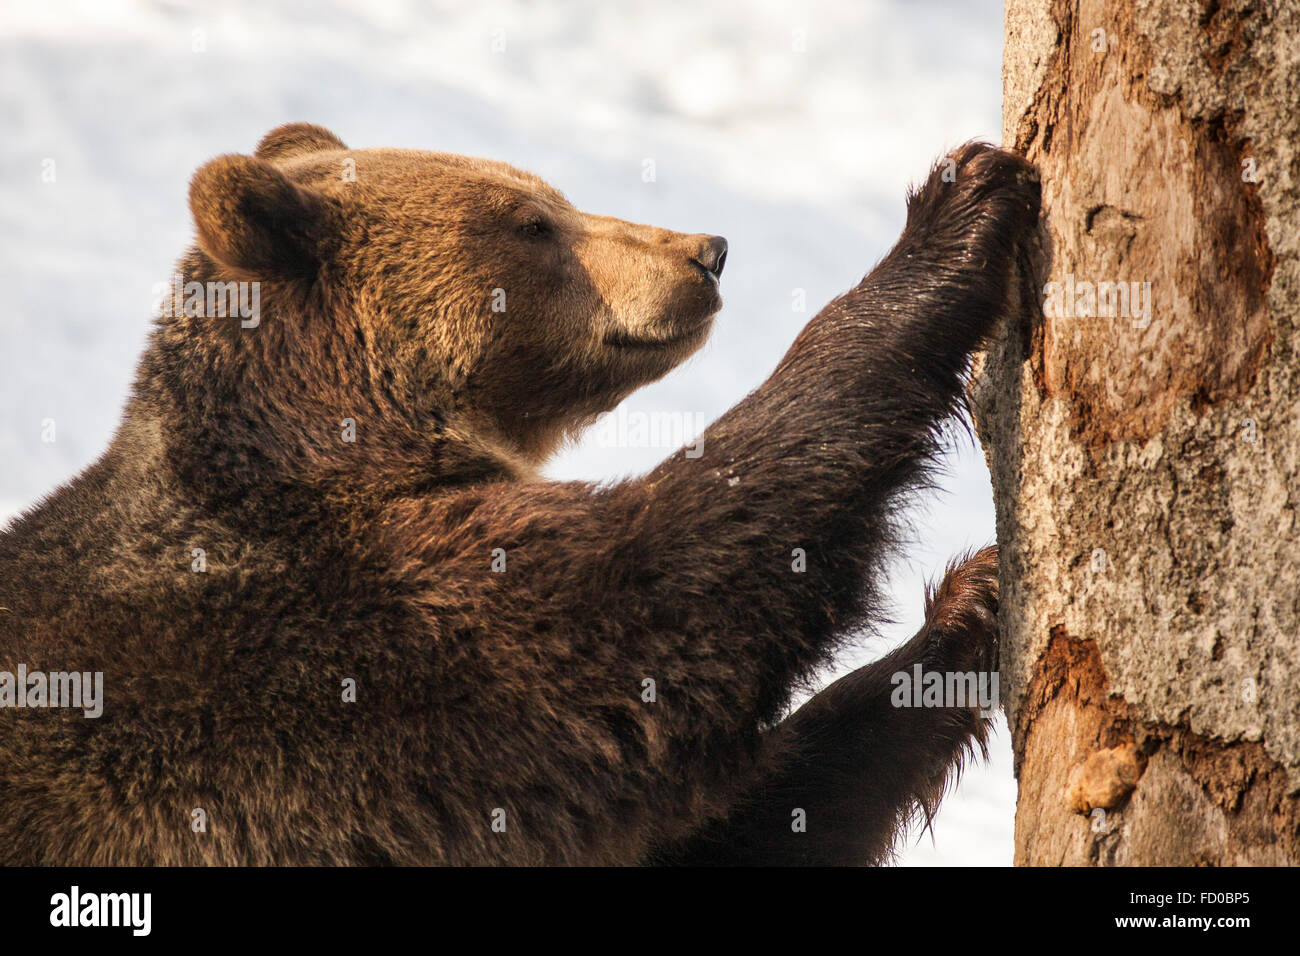 Female European brown bear (Ursus arctos arctos) scratching a tree in woodland, in the Bavarian Forest National Park, Germany. Stock Photo